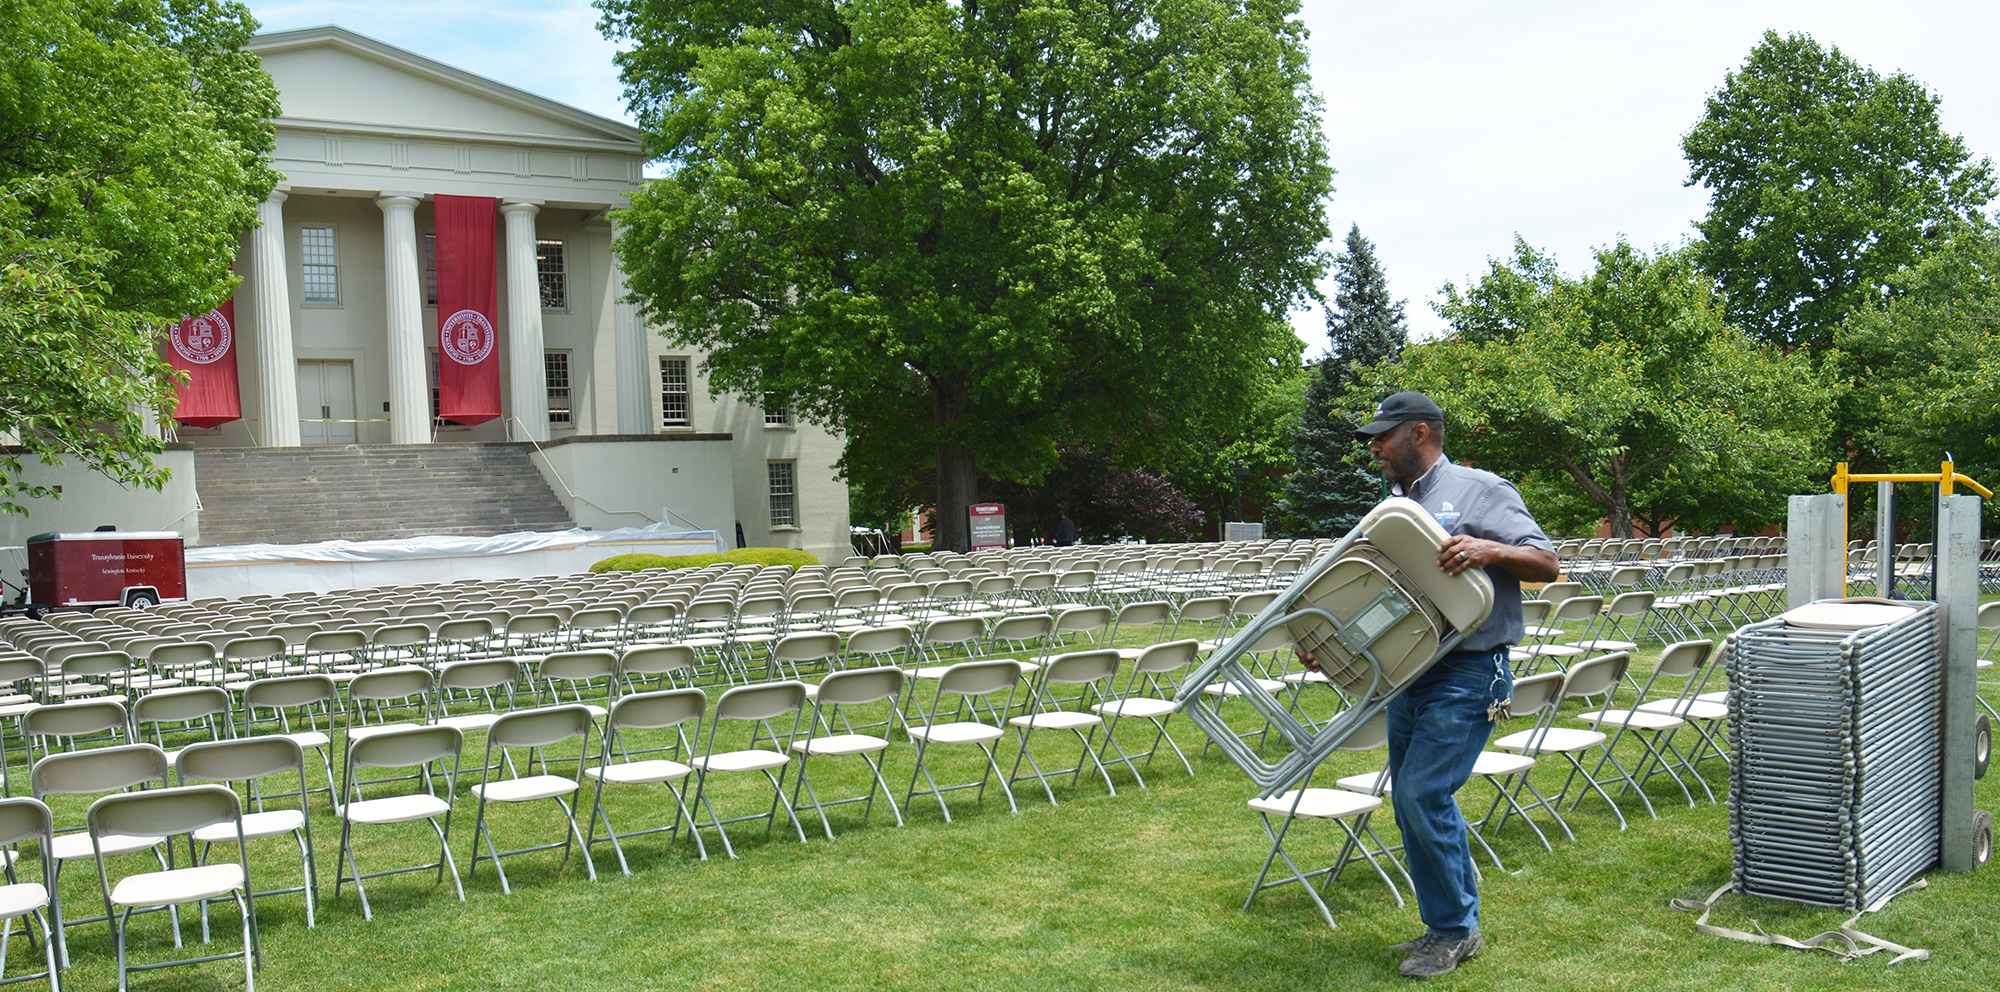 Transylvania setting stage for Saturday commencement; watch live on Facebook